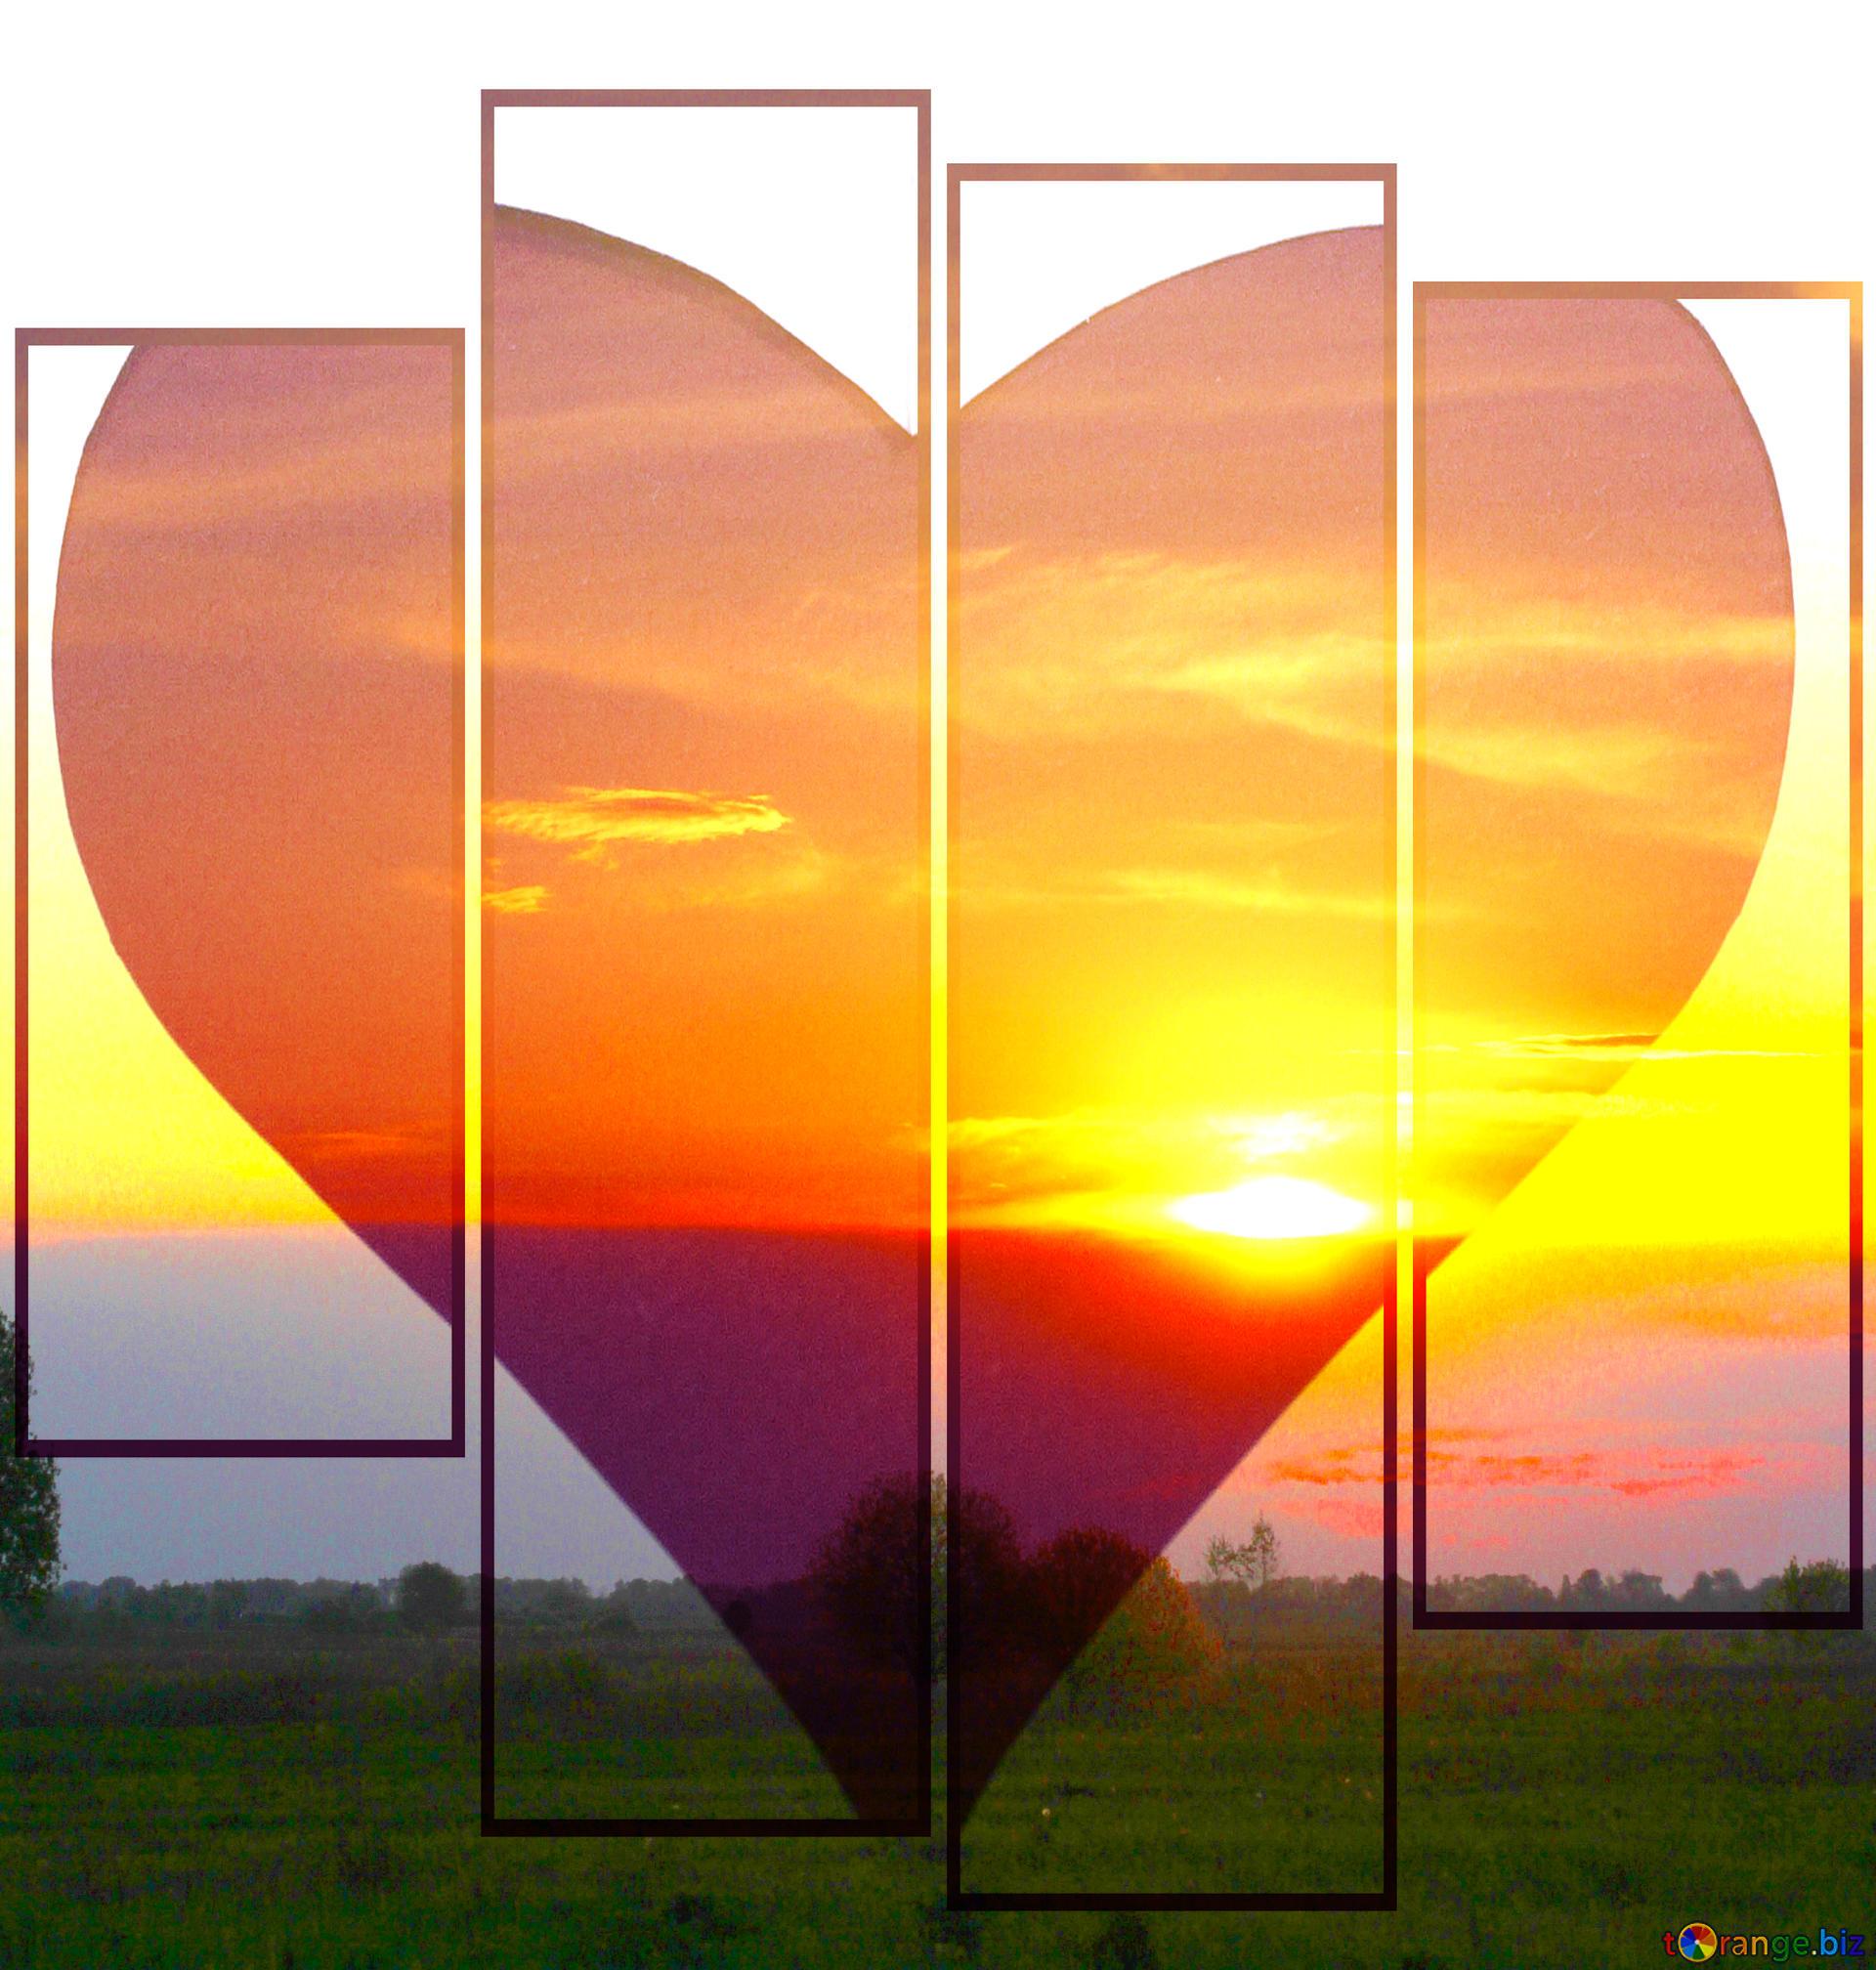 Download free picture Heart love background with sunset sky on CC